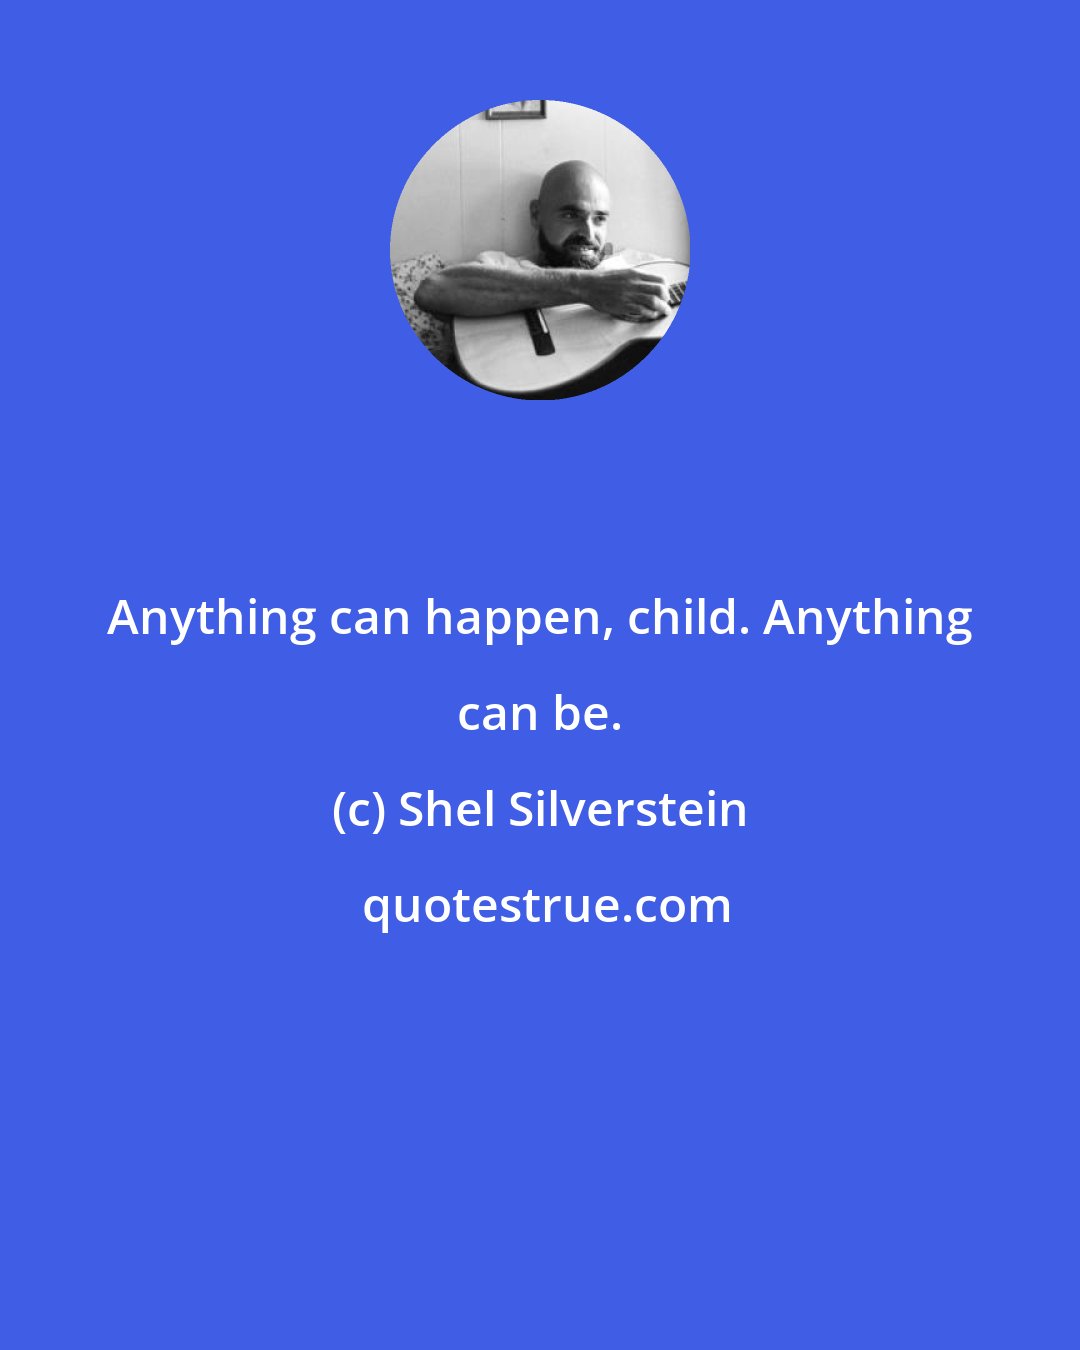 Shel Silverstein: Anything can happen, child. Anything can be.